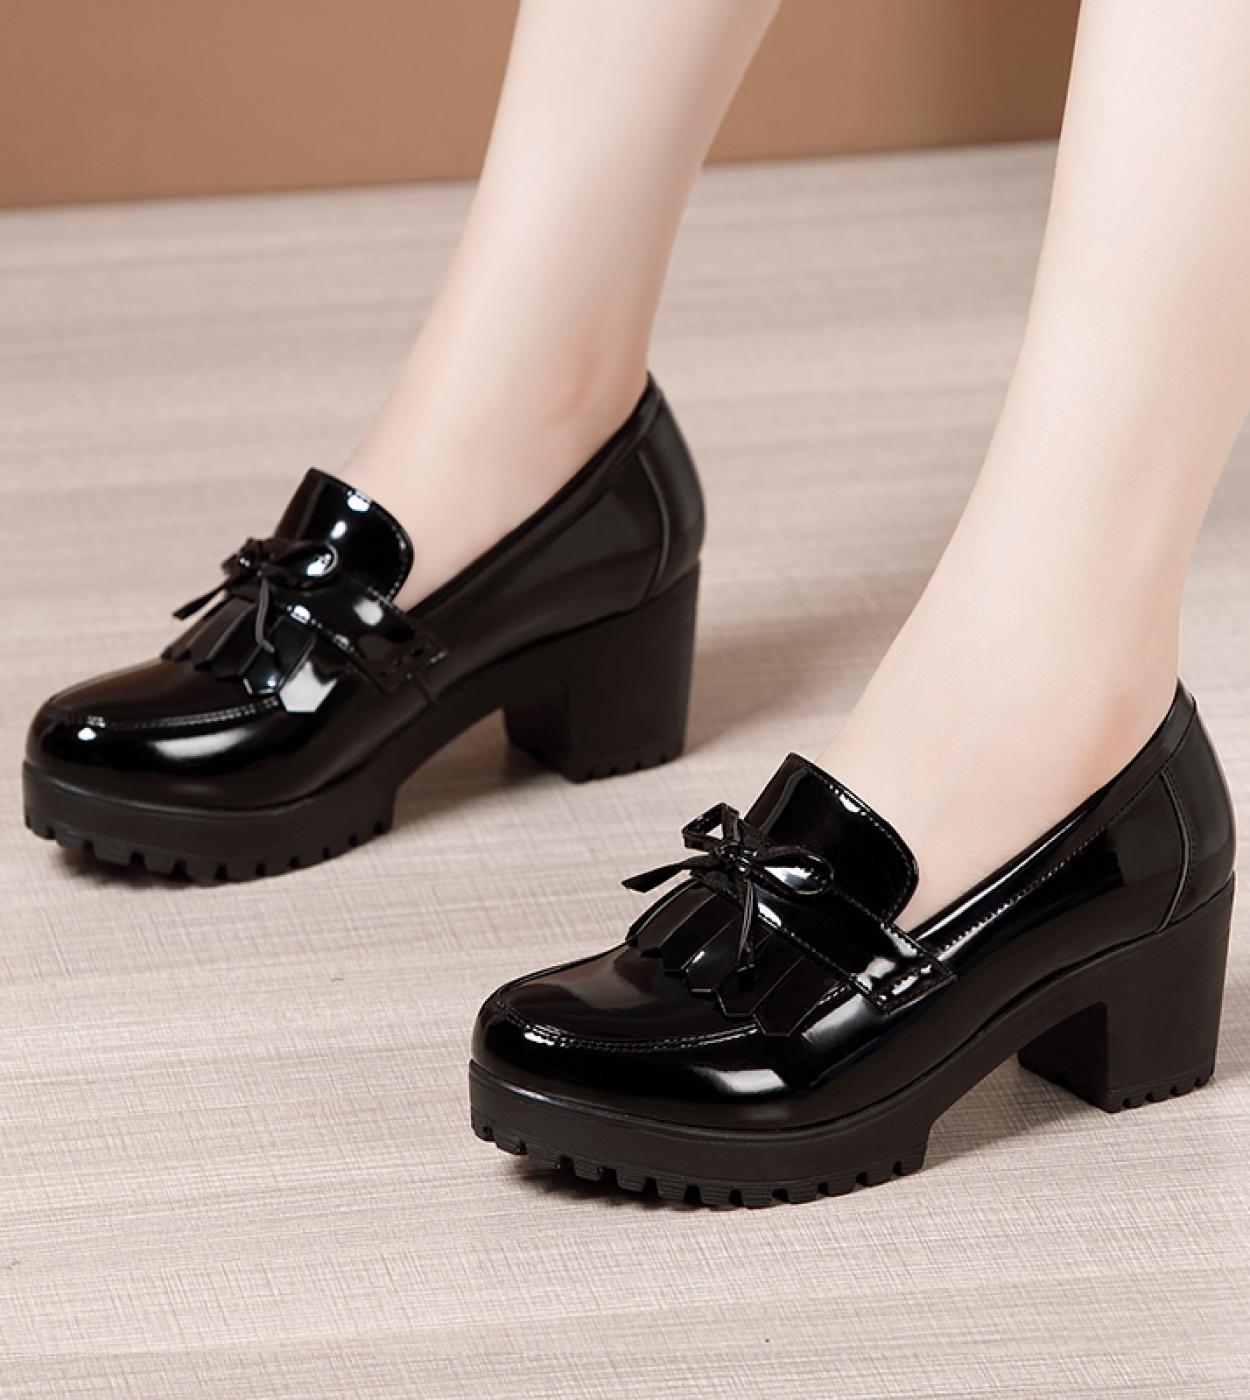 Comemore Female Pumps Spring Slip On Tassels Medium Heels Oxford Women Shoes Woman Party Patent Leather Footwear Plus Si